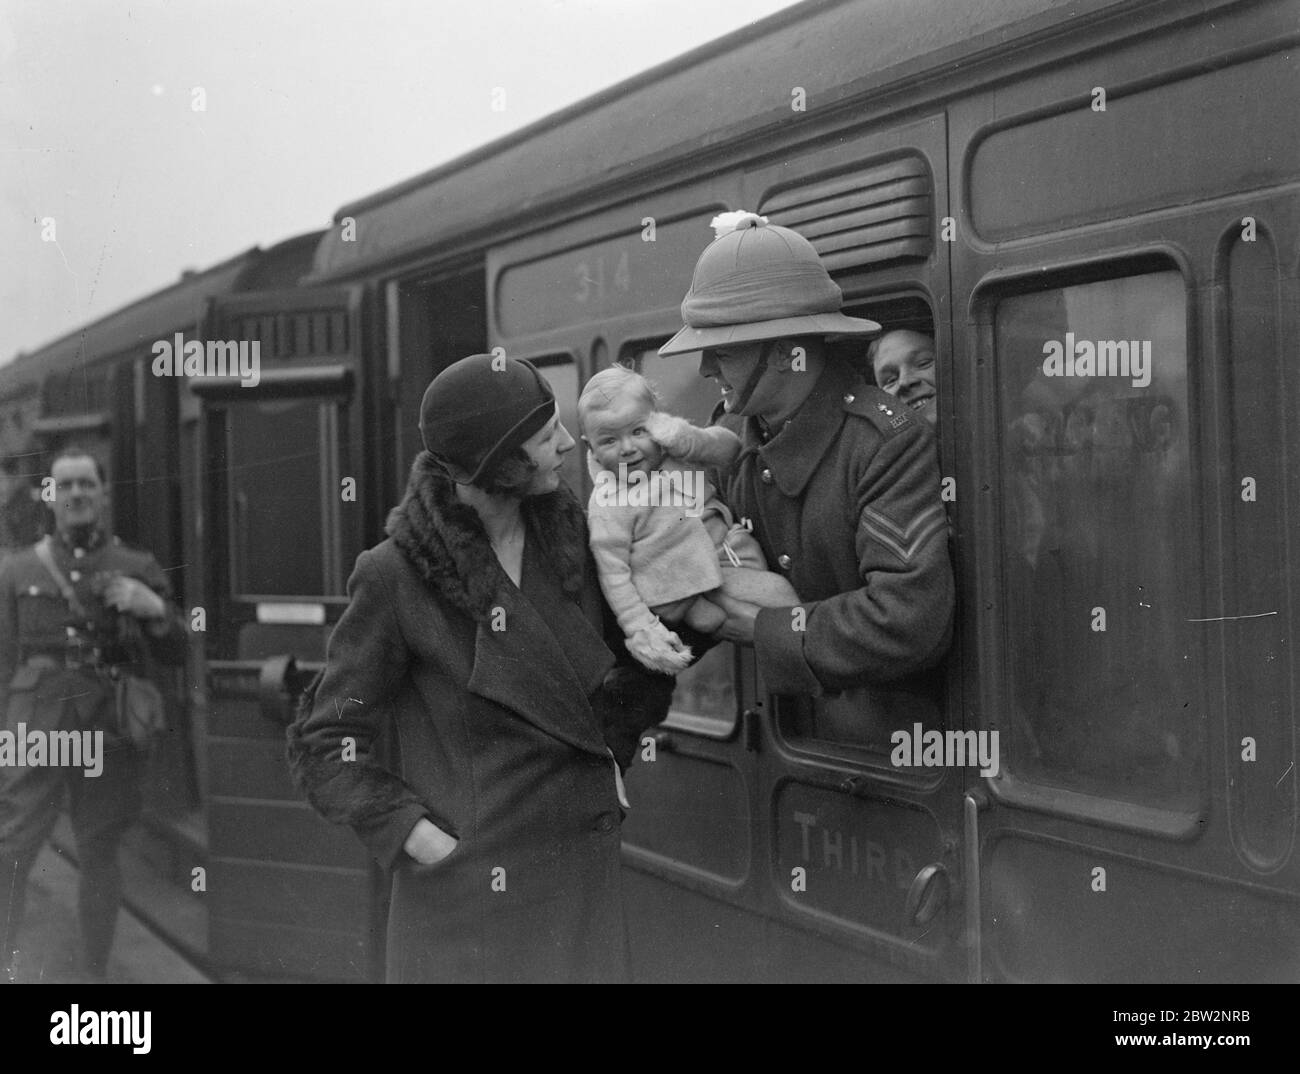 Scots fusiliers ' Prince of Wales regiment leave for Palestine . The 1st Battalion the Royal Scots Fusiliers , of which the Prince of Wales is Colonel , left Bordon Camp near Aldershot , for Palestine . One of the men bidding goodbye to his wife and baby on Bordon Station as the regiment entertained . . 23 February 1932 30s, 30's, 1930s, 1930's, thirties, nineteen thirties Stock Photo